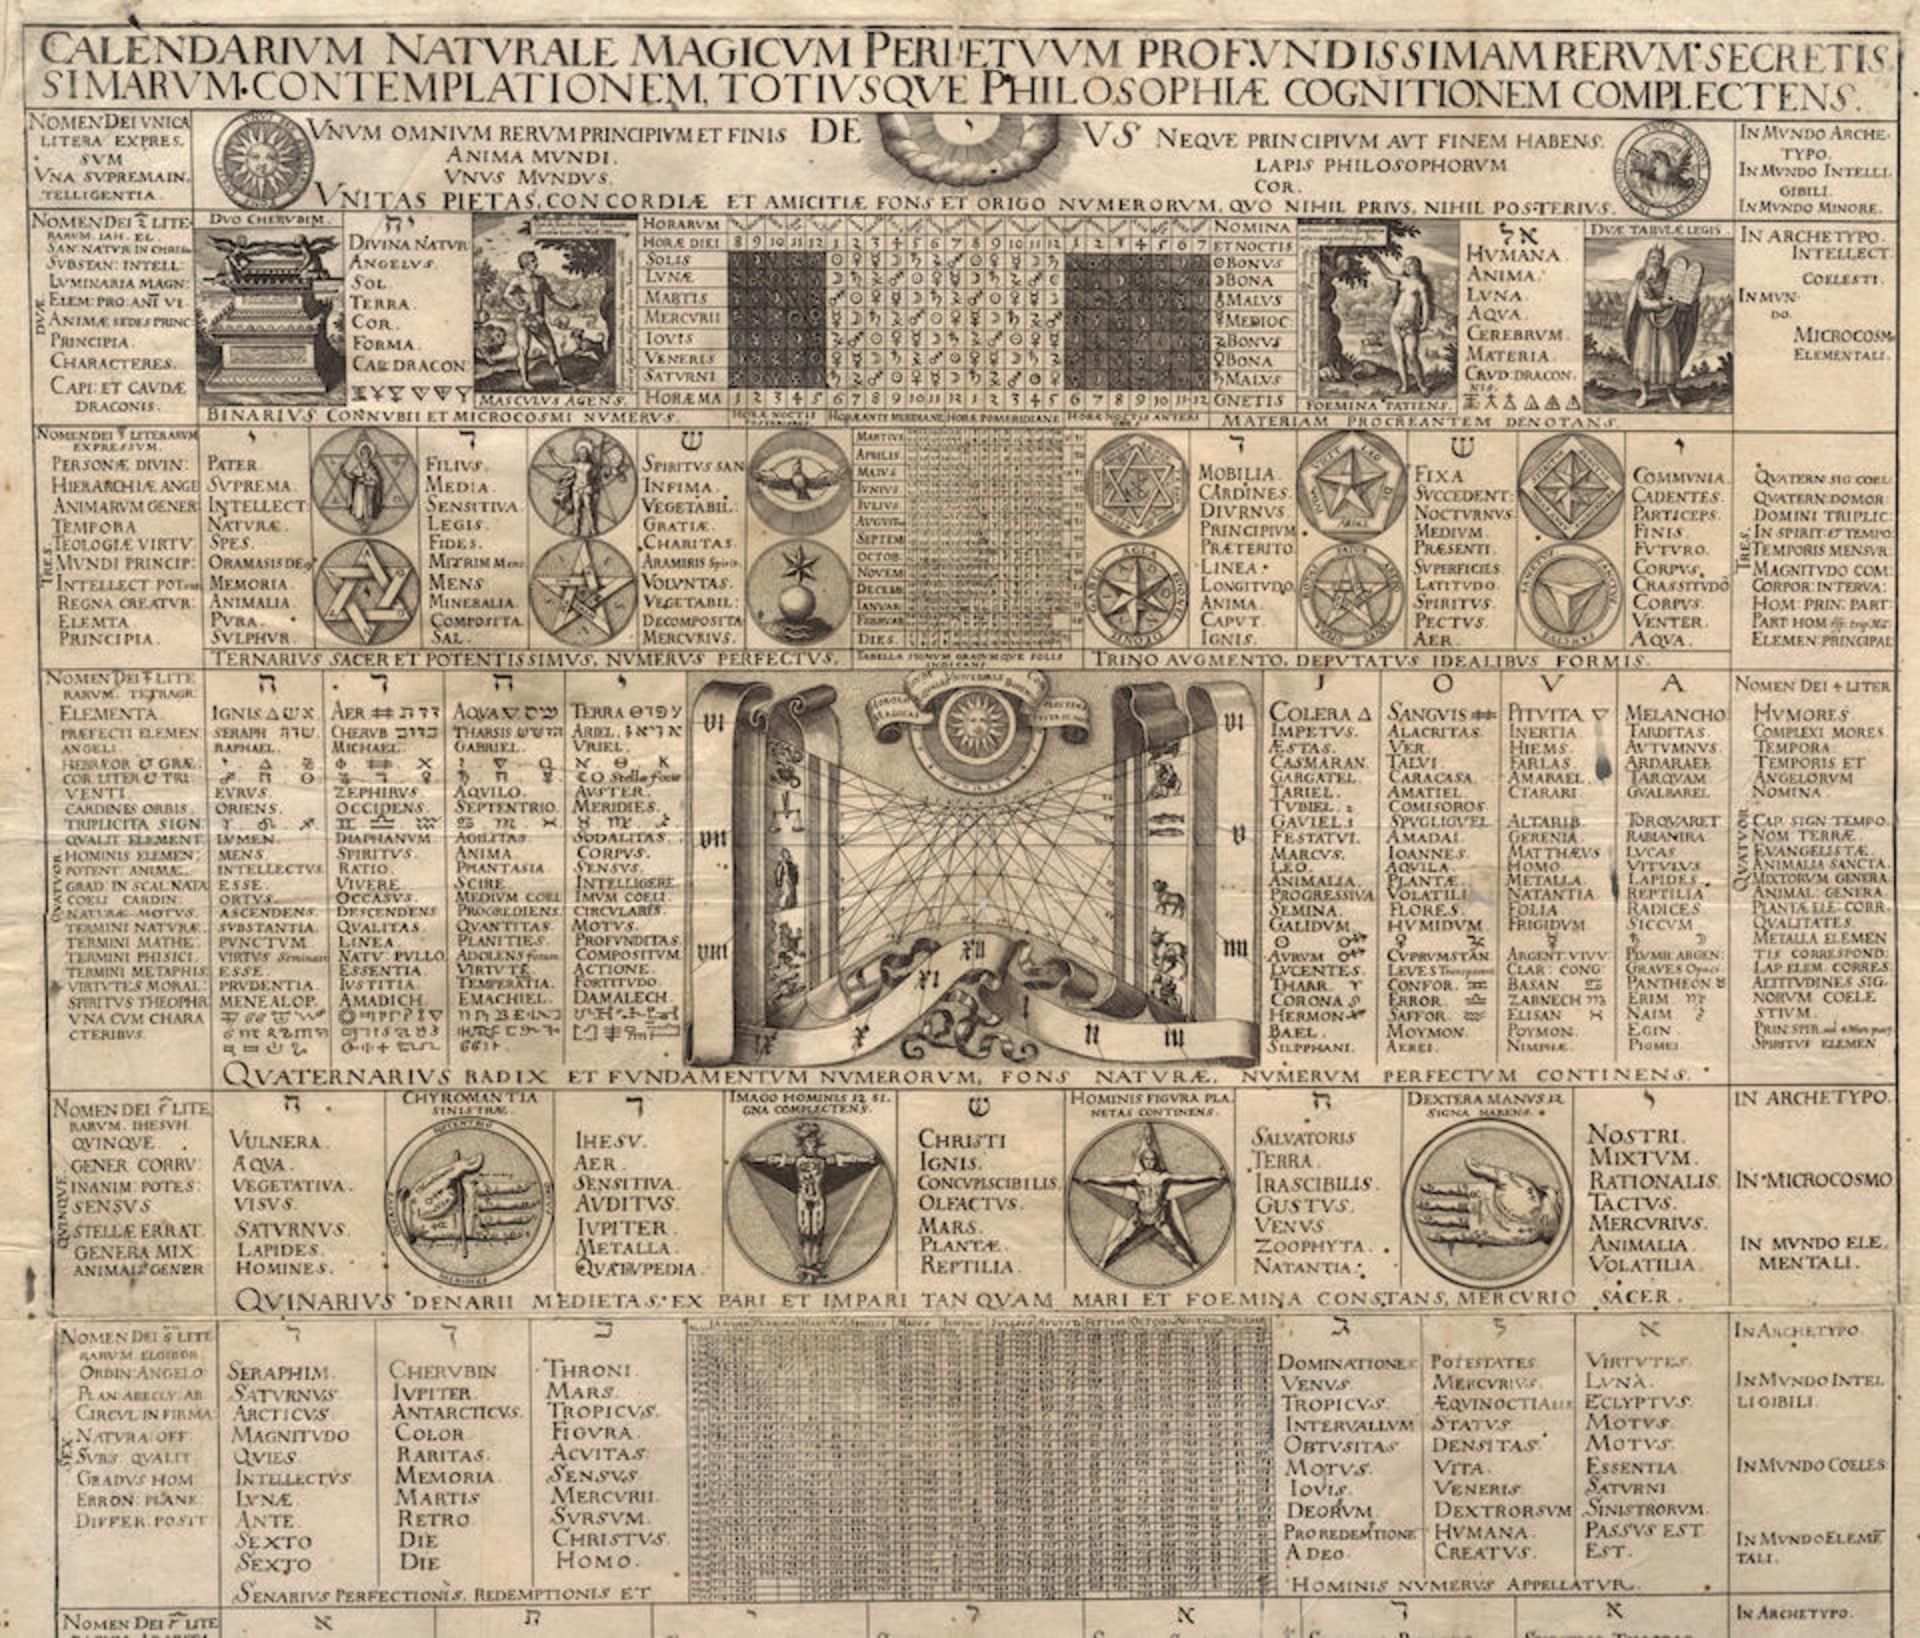 [OCCULT SCIENCE] 'THE MAGICAL CALENDAR OF TYCHO BRAHE': RARE HERMETIC BROADSIDE. GROSSCHEDEL, JO... - Bild 2 aus 4